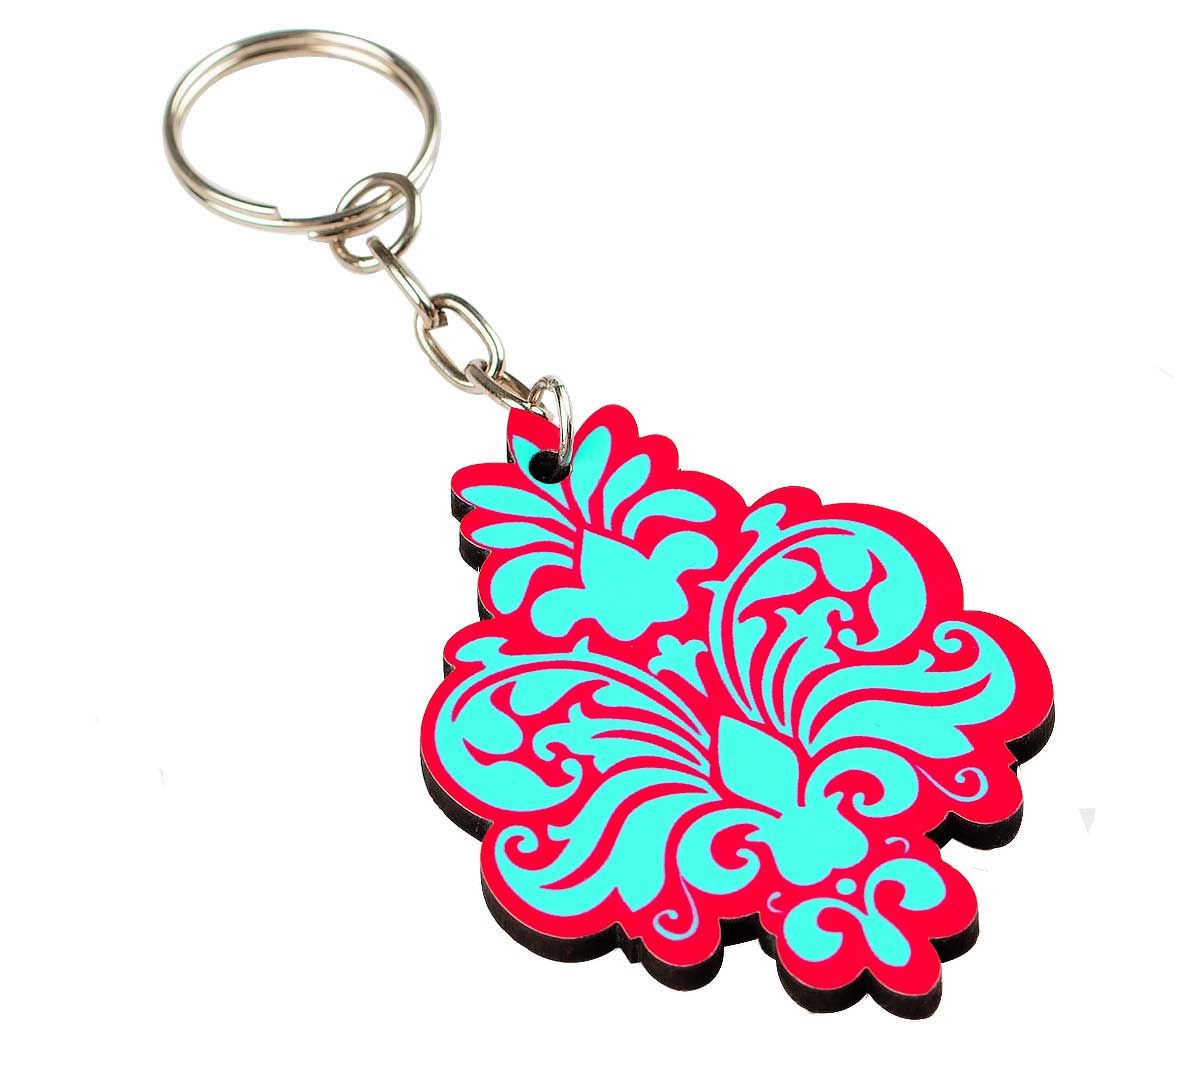 Floral Blossom Keychain